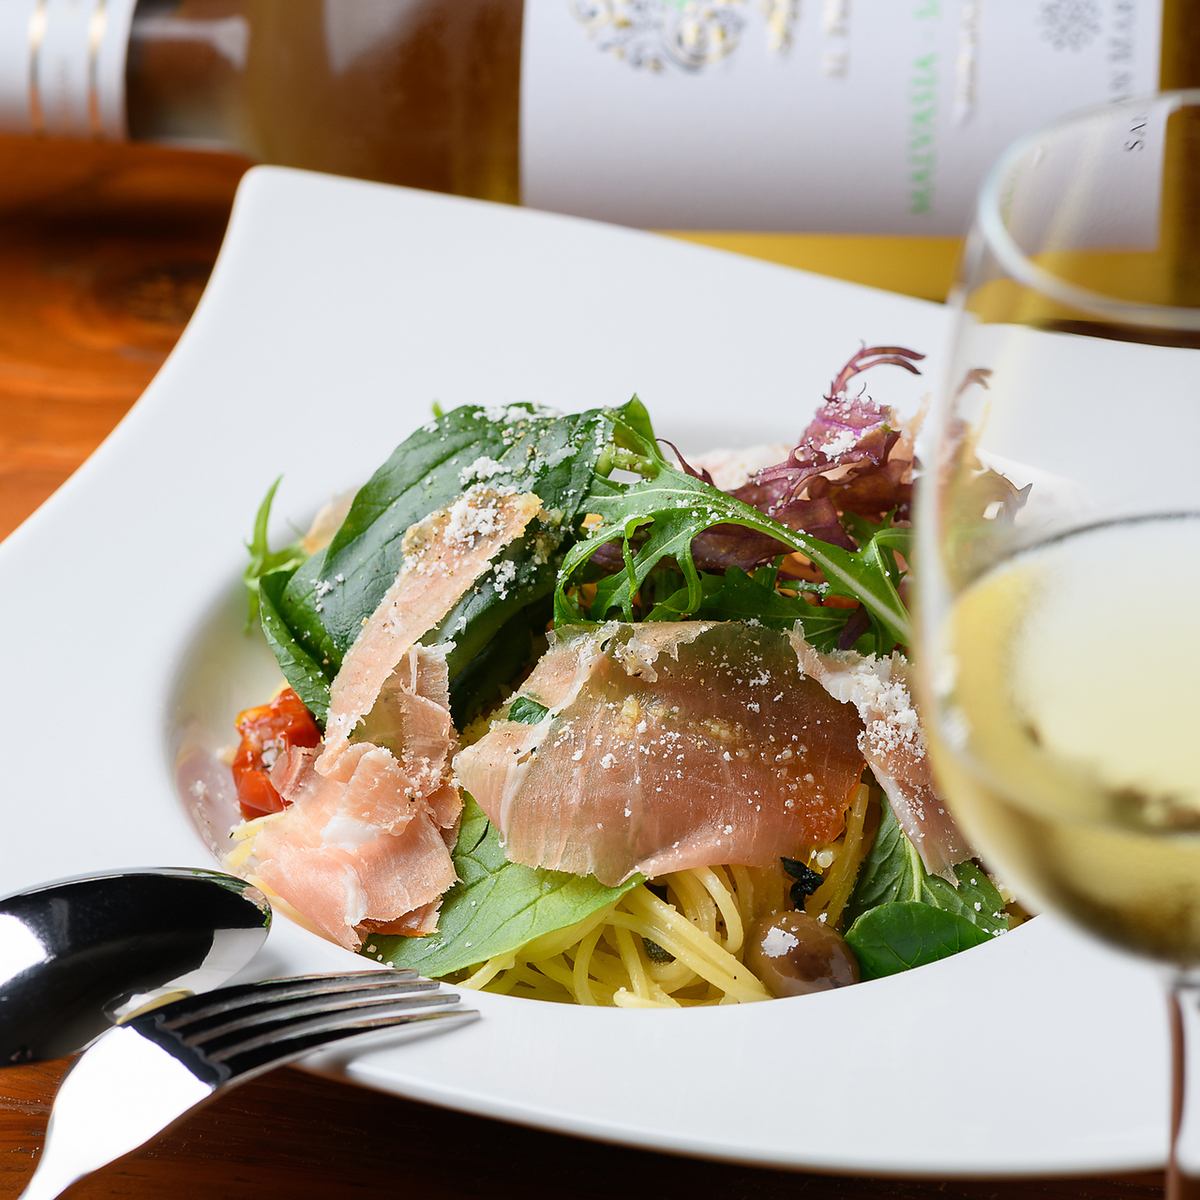 At our restaurant, you can enjoy wine from lunchtime.